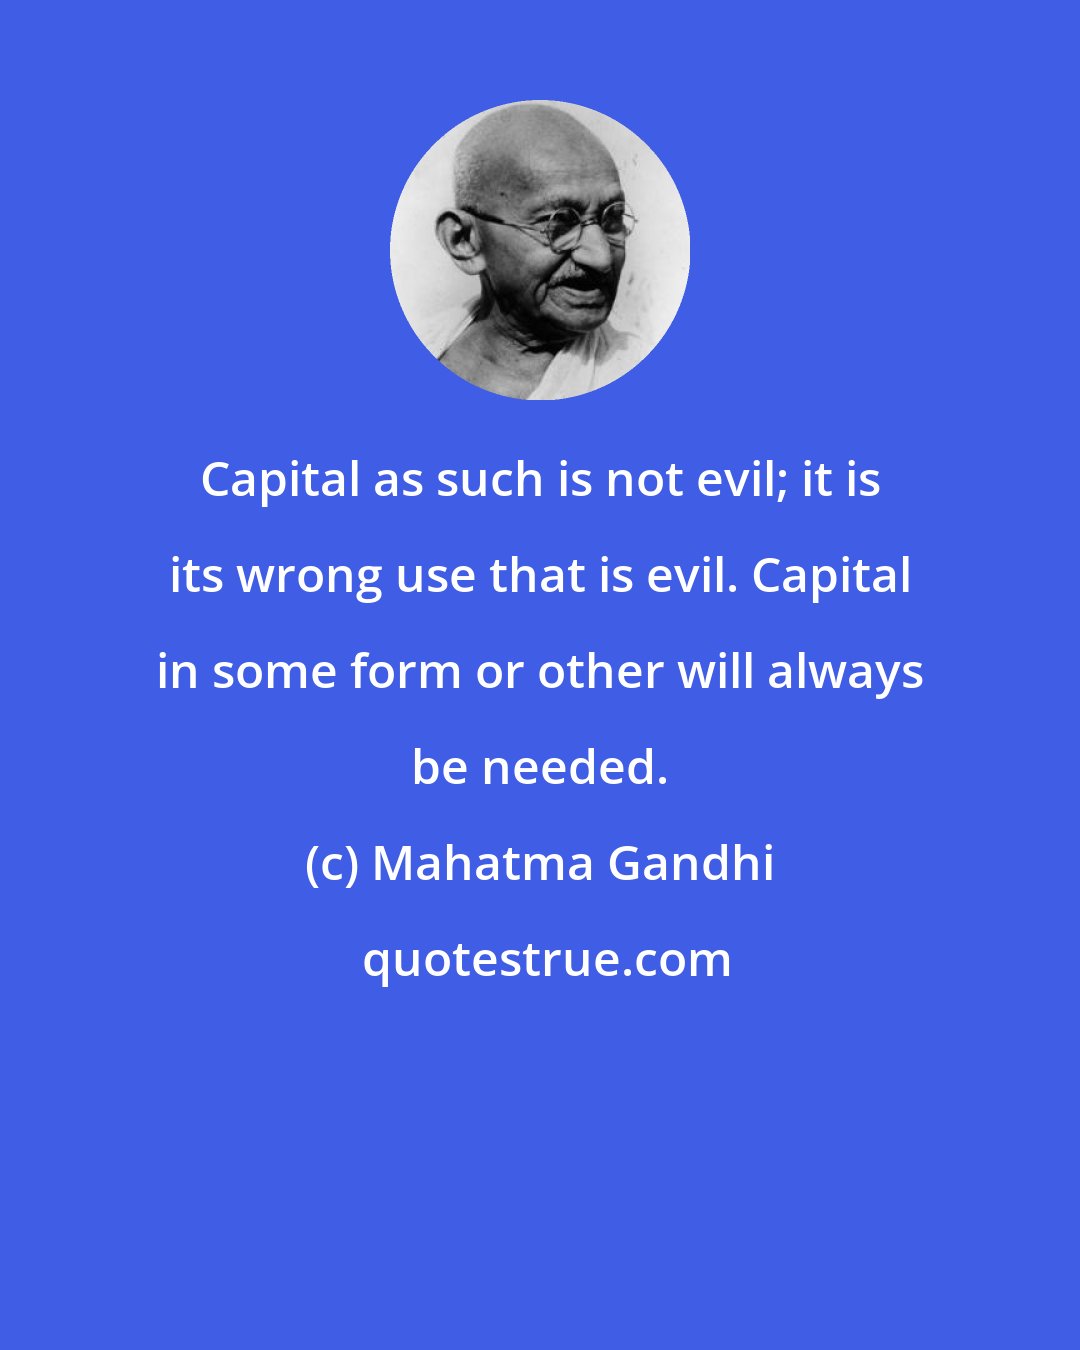 Mahatma Gandhi: Capital as such is not evil; it is its wrong use that is evil. Capital in some form or other will always be needed.